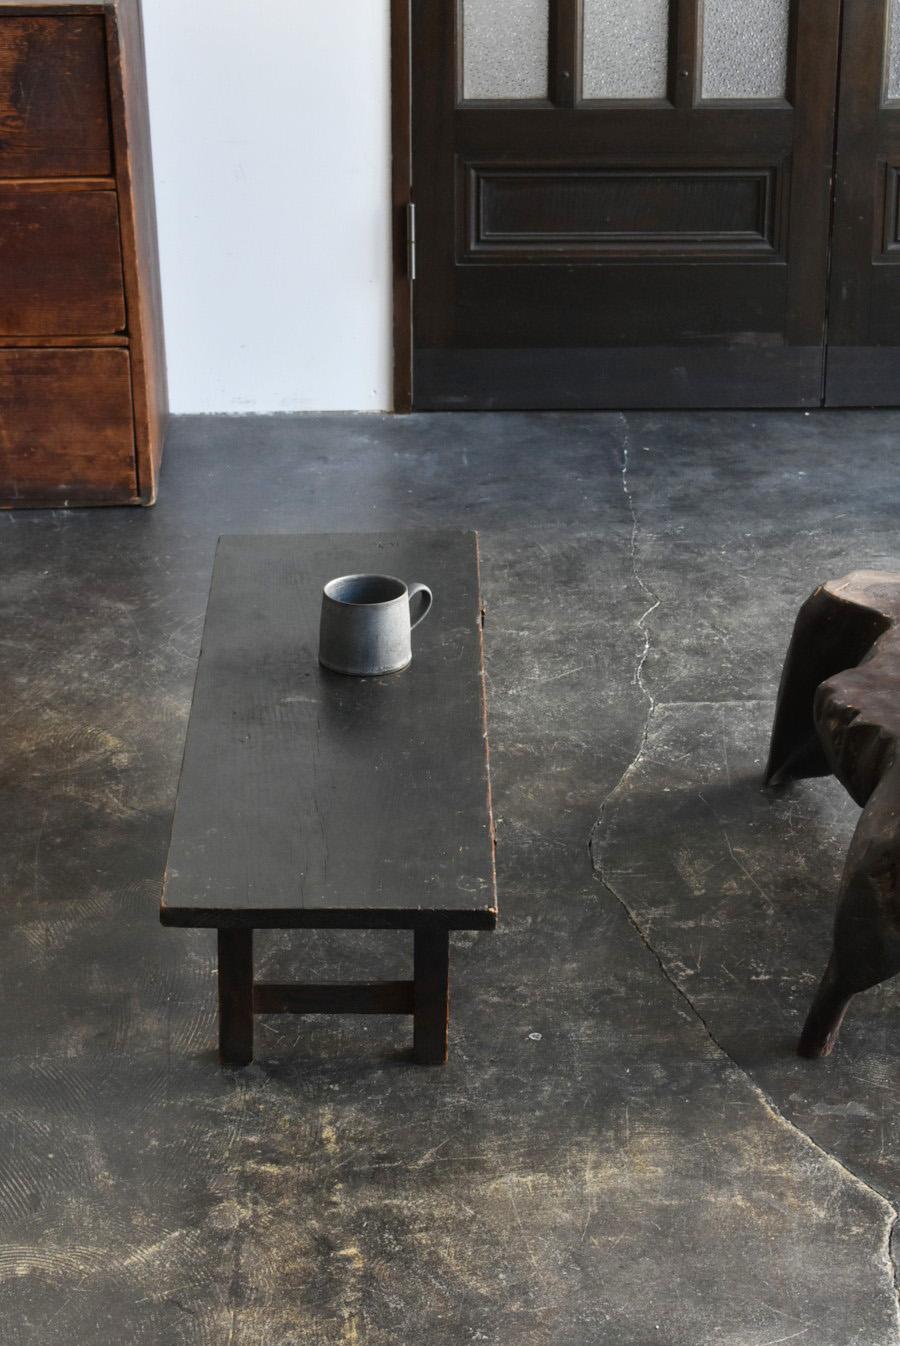 This is a Japanese antique wooden black low table made from the end of the Edo period to the Meiji period.
Made from pine wood.
It has a very simple design and is suitable for modern spaces.
It is mainly used as a workbench or study desk.
It is